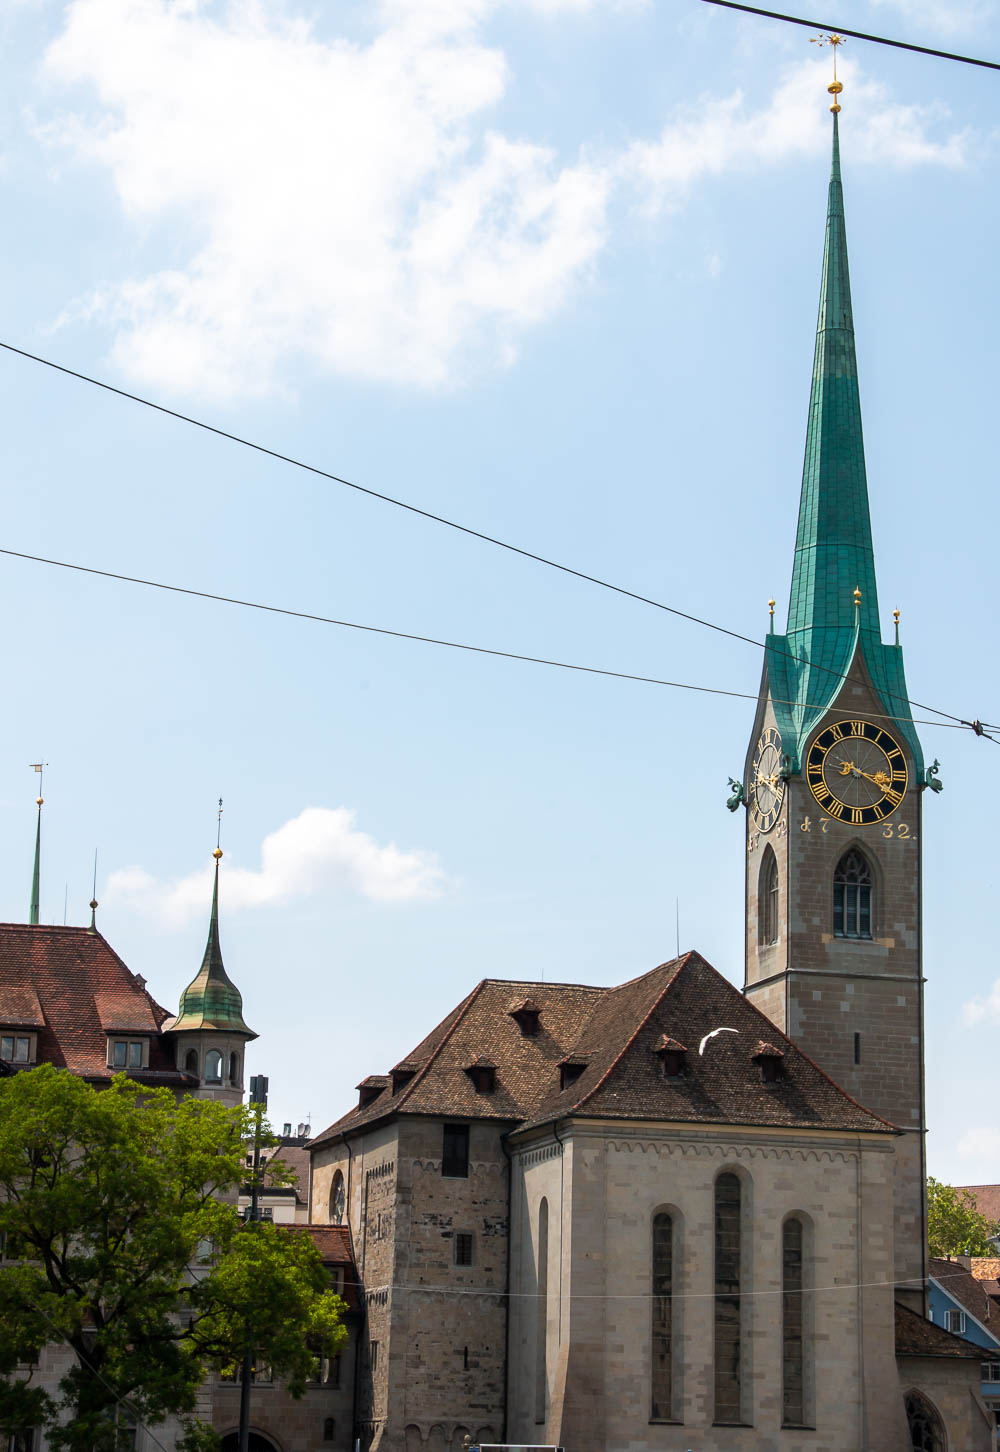 20 Photos to Inspire You to Visit Zurich -Roads and Destinations